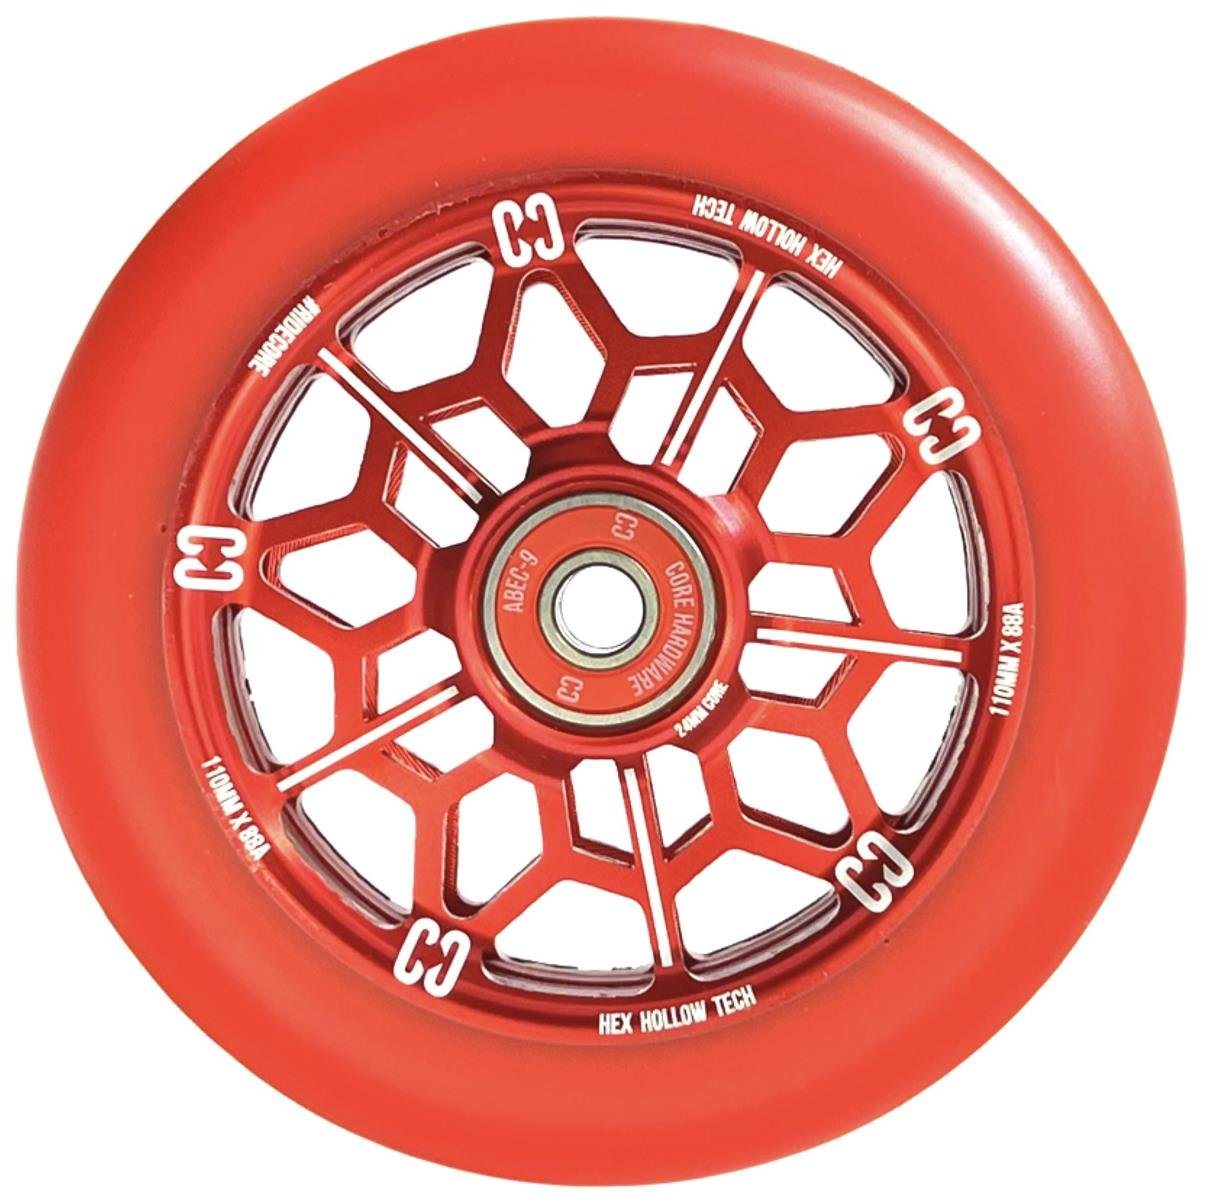 Core Action Sports Stuntscooter Core Hex Hollow Stunt-Scooter Rolle 110mm Rot von Core Action Sports